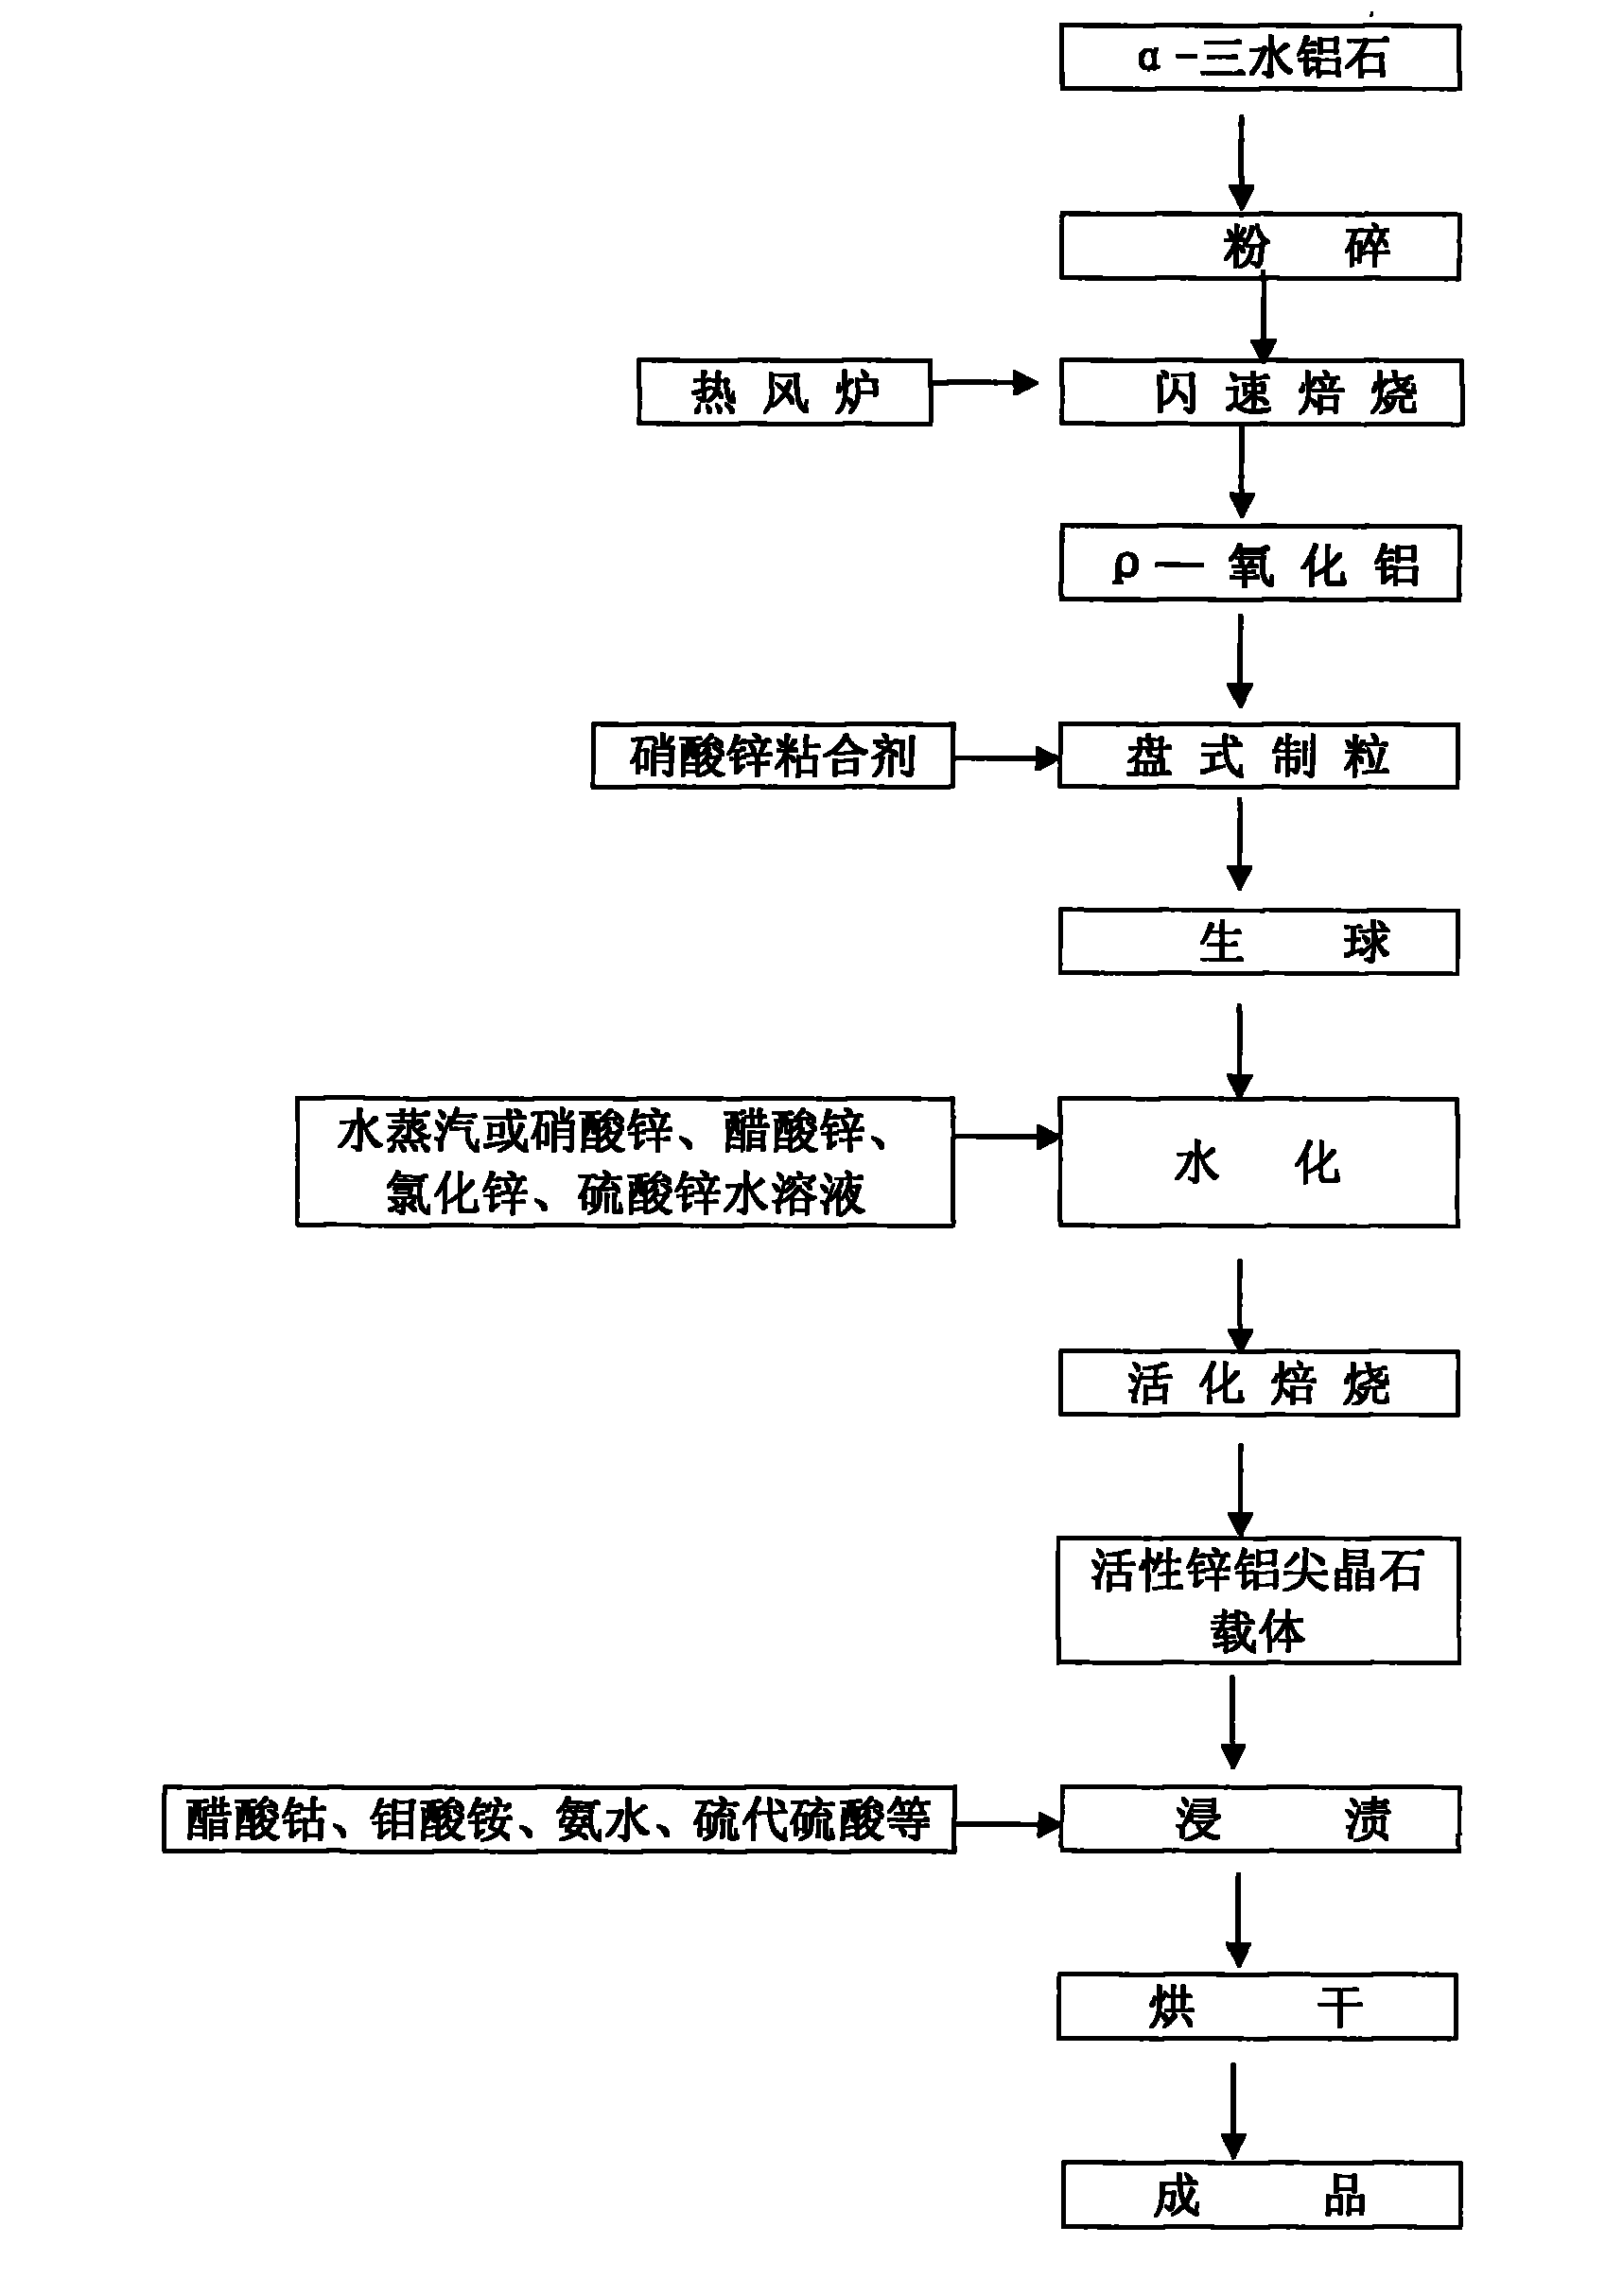 Preparation method of antitoxin suitable for high pressure conversion